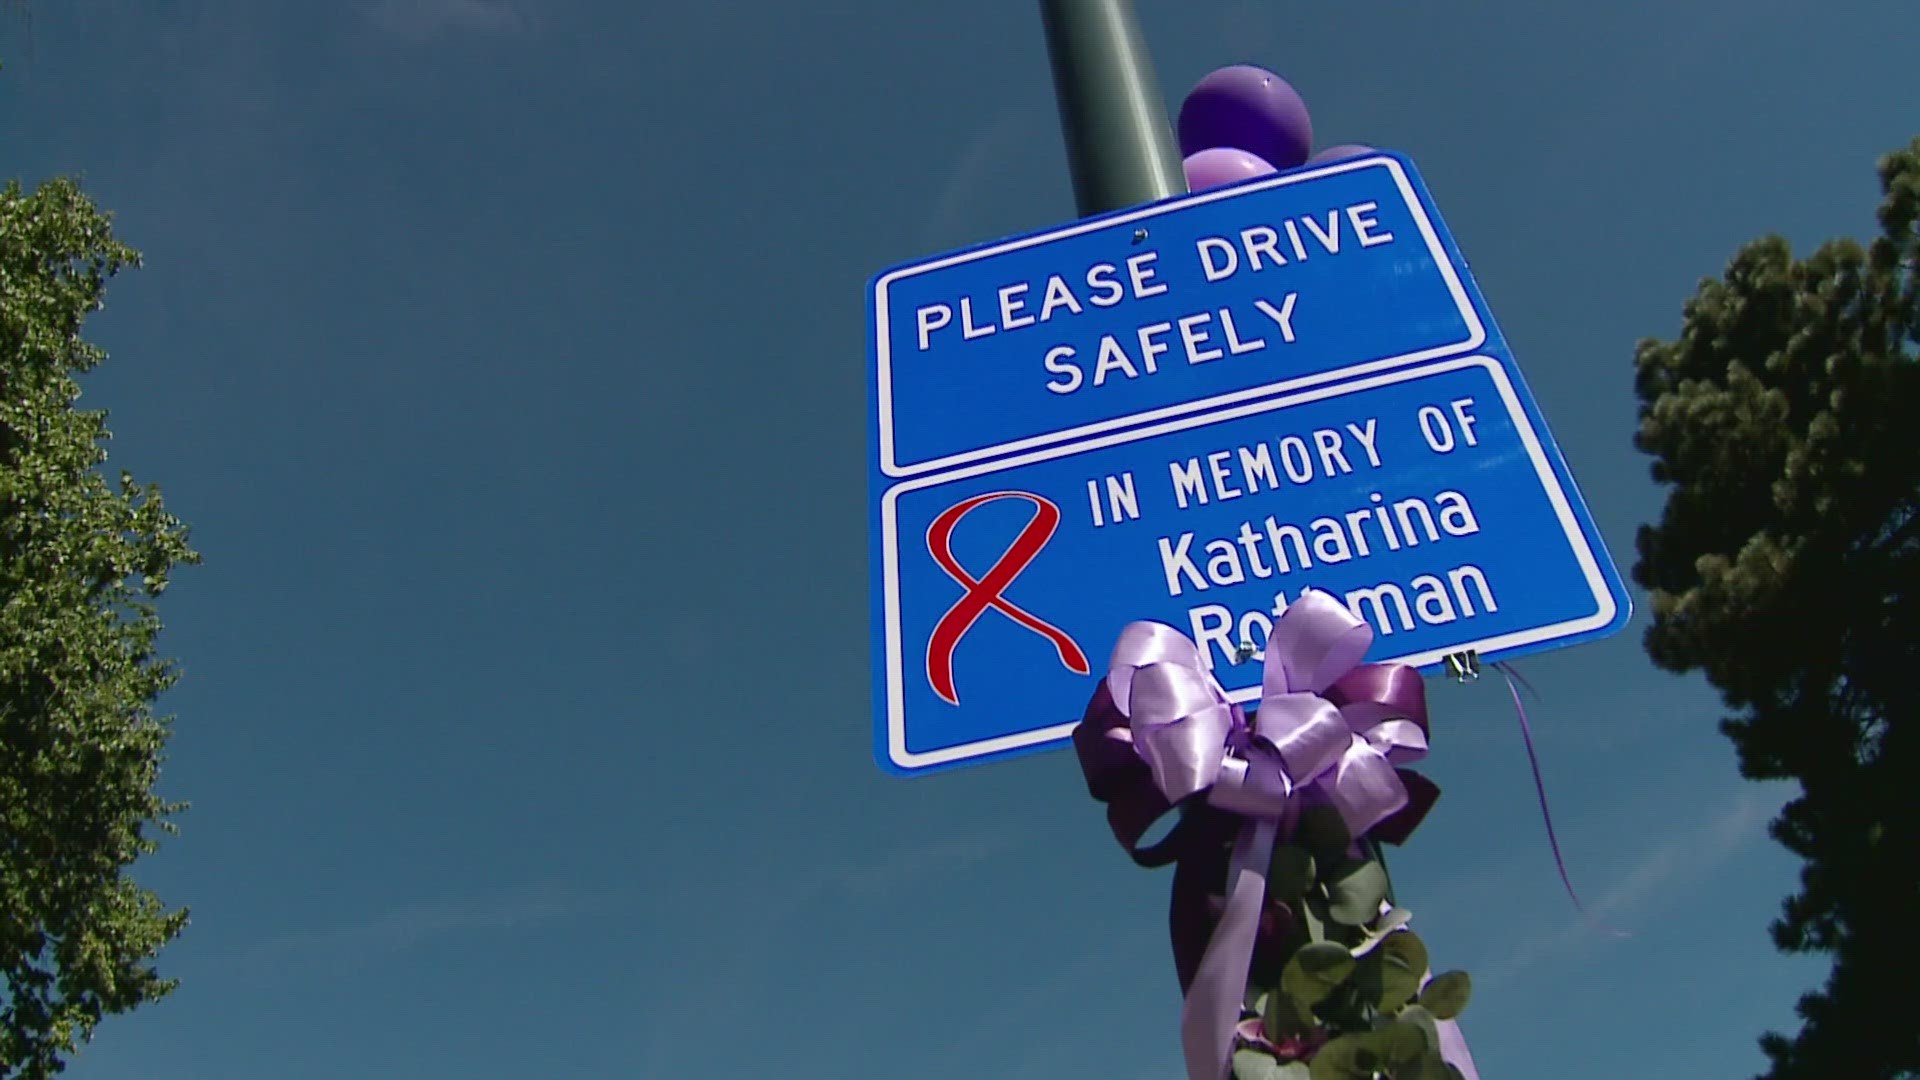 Katharina Rothman's name is on display where she was killed as Coban Porter remains on bond in a suspected drunk driving case.